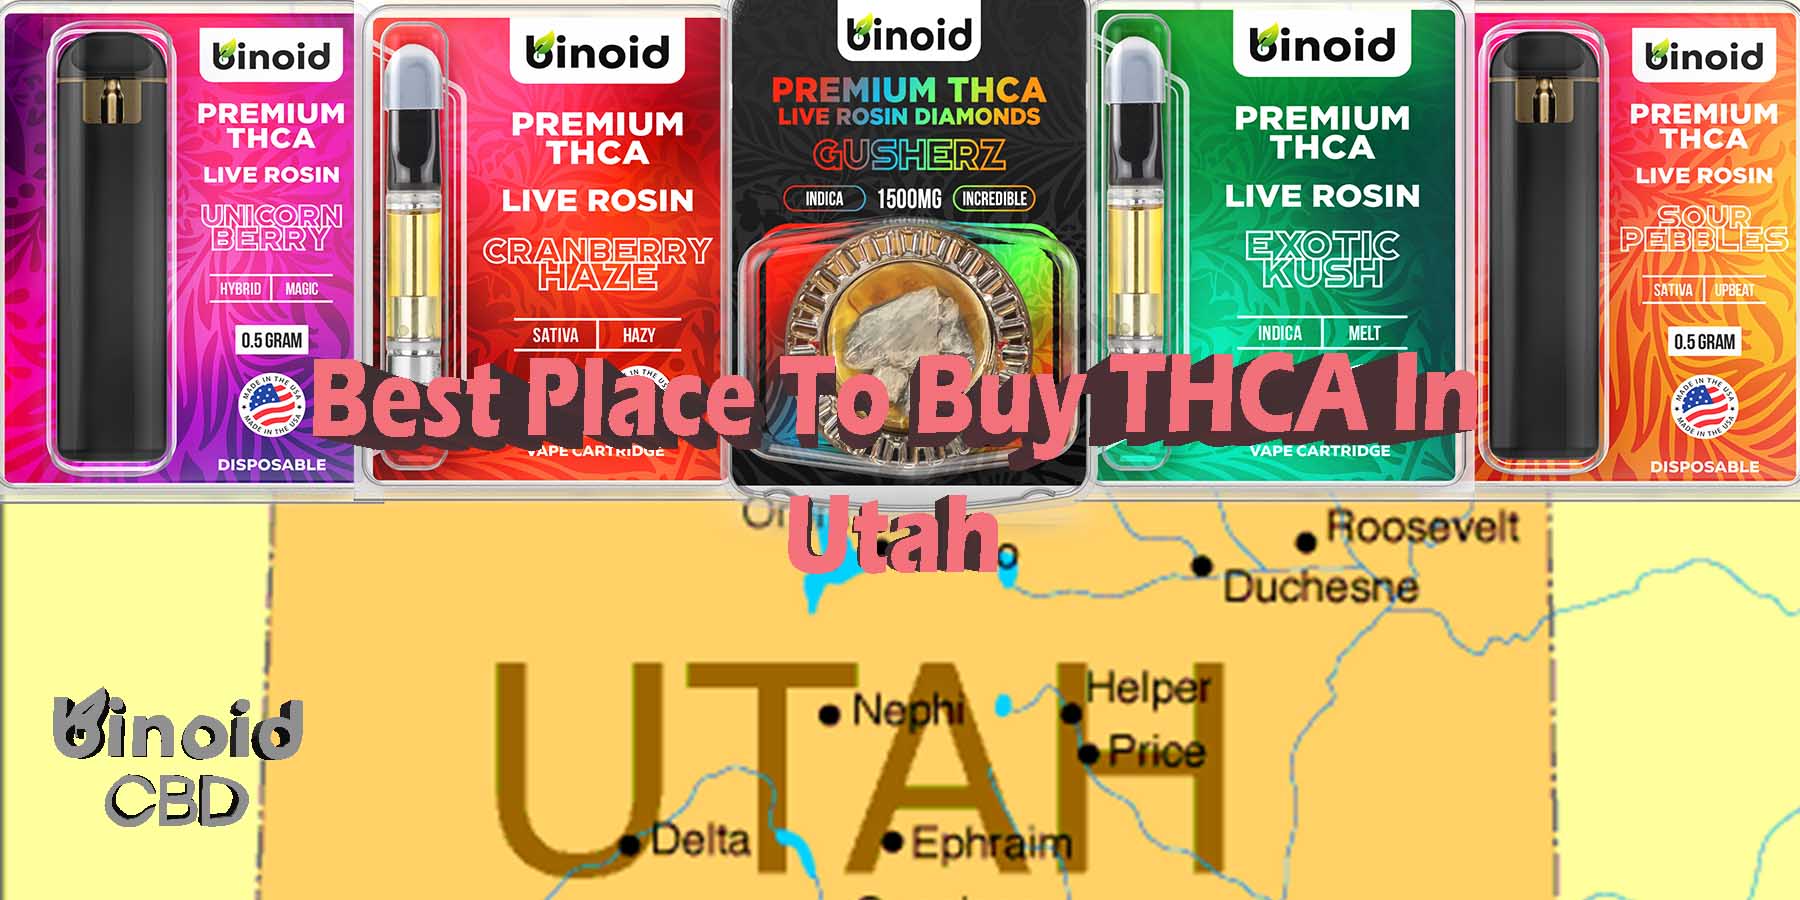 Best Place To Buy THCA In Utah Best Brand Price Get Near Me Lowest Coupon Discount Store Shop Vapes Carts Online Best Brand Strongest Get Near Me How To Get Binoid Reddit